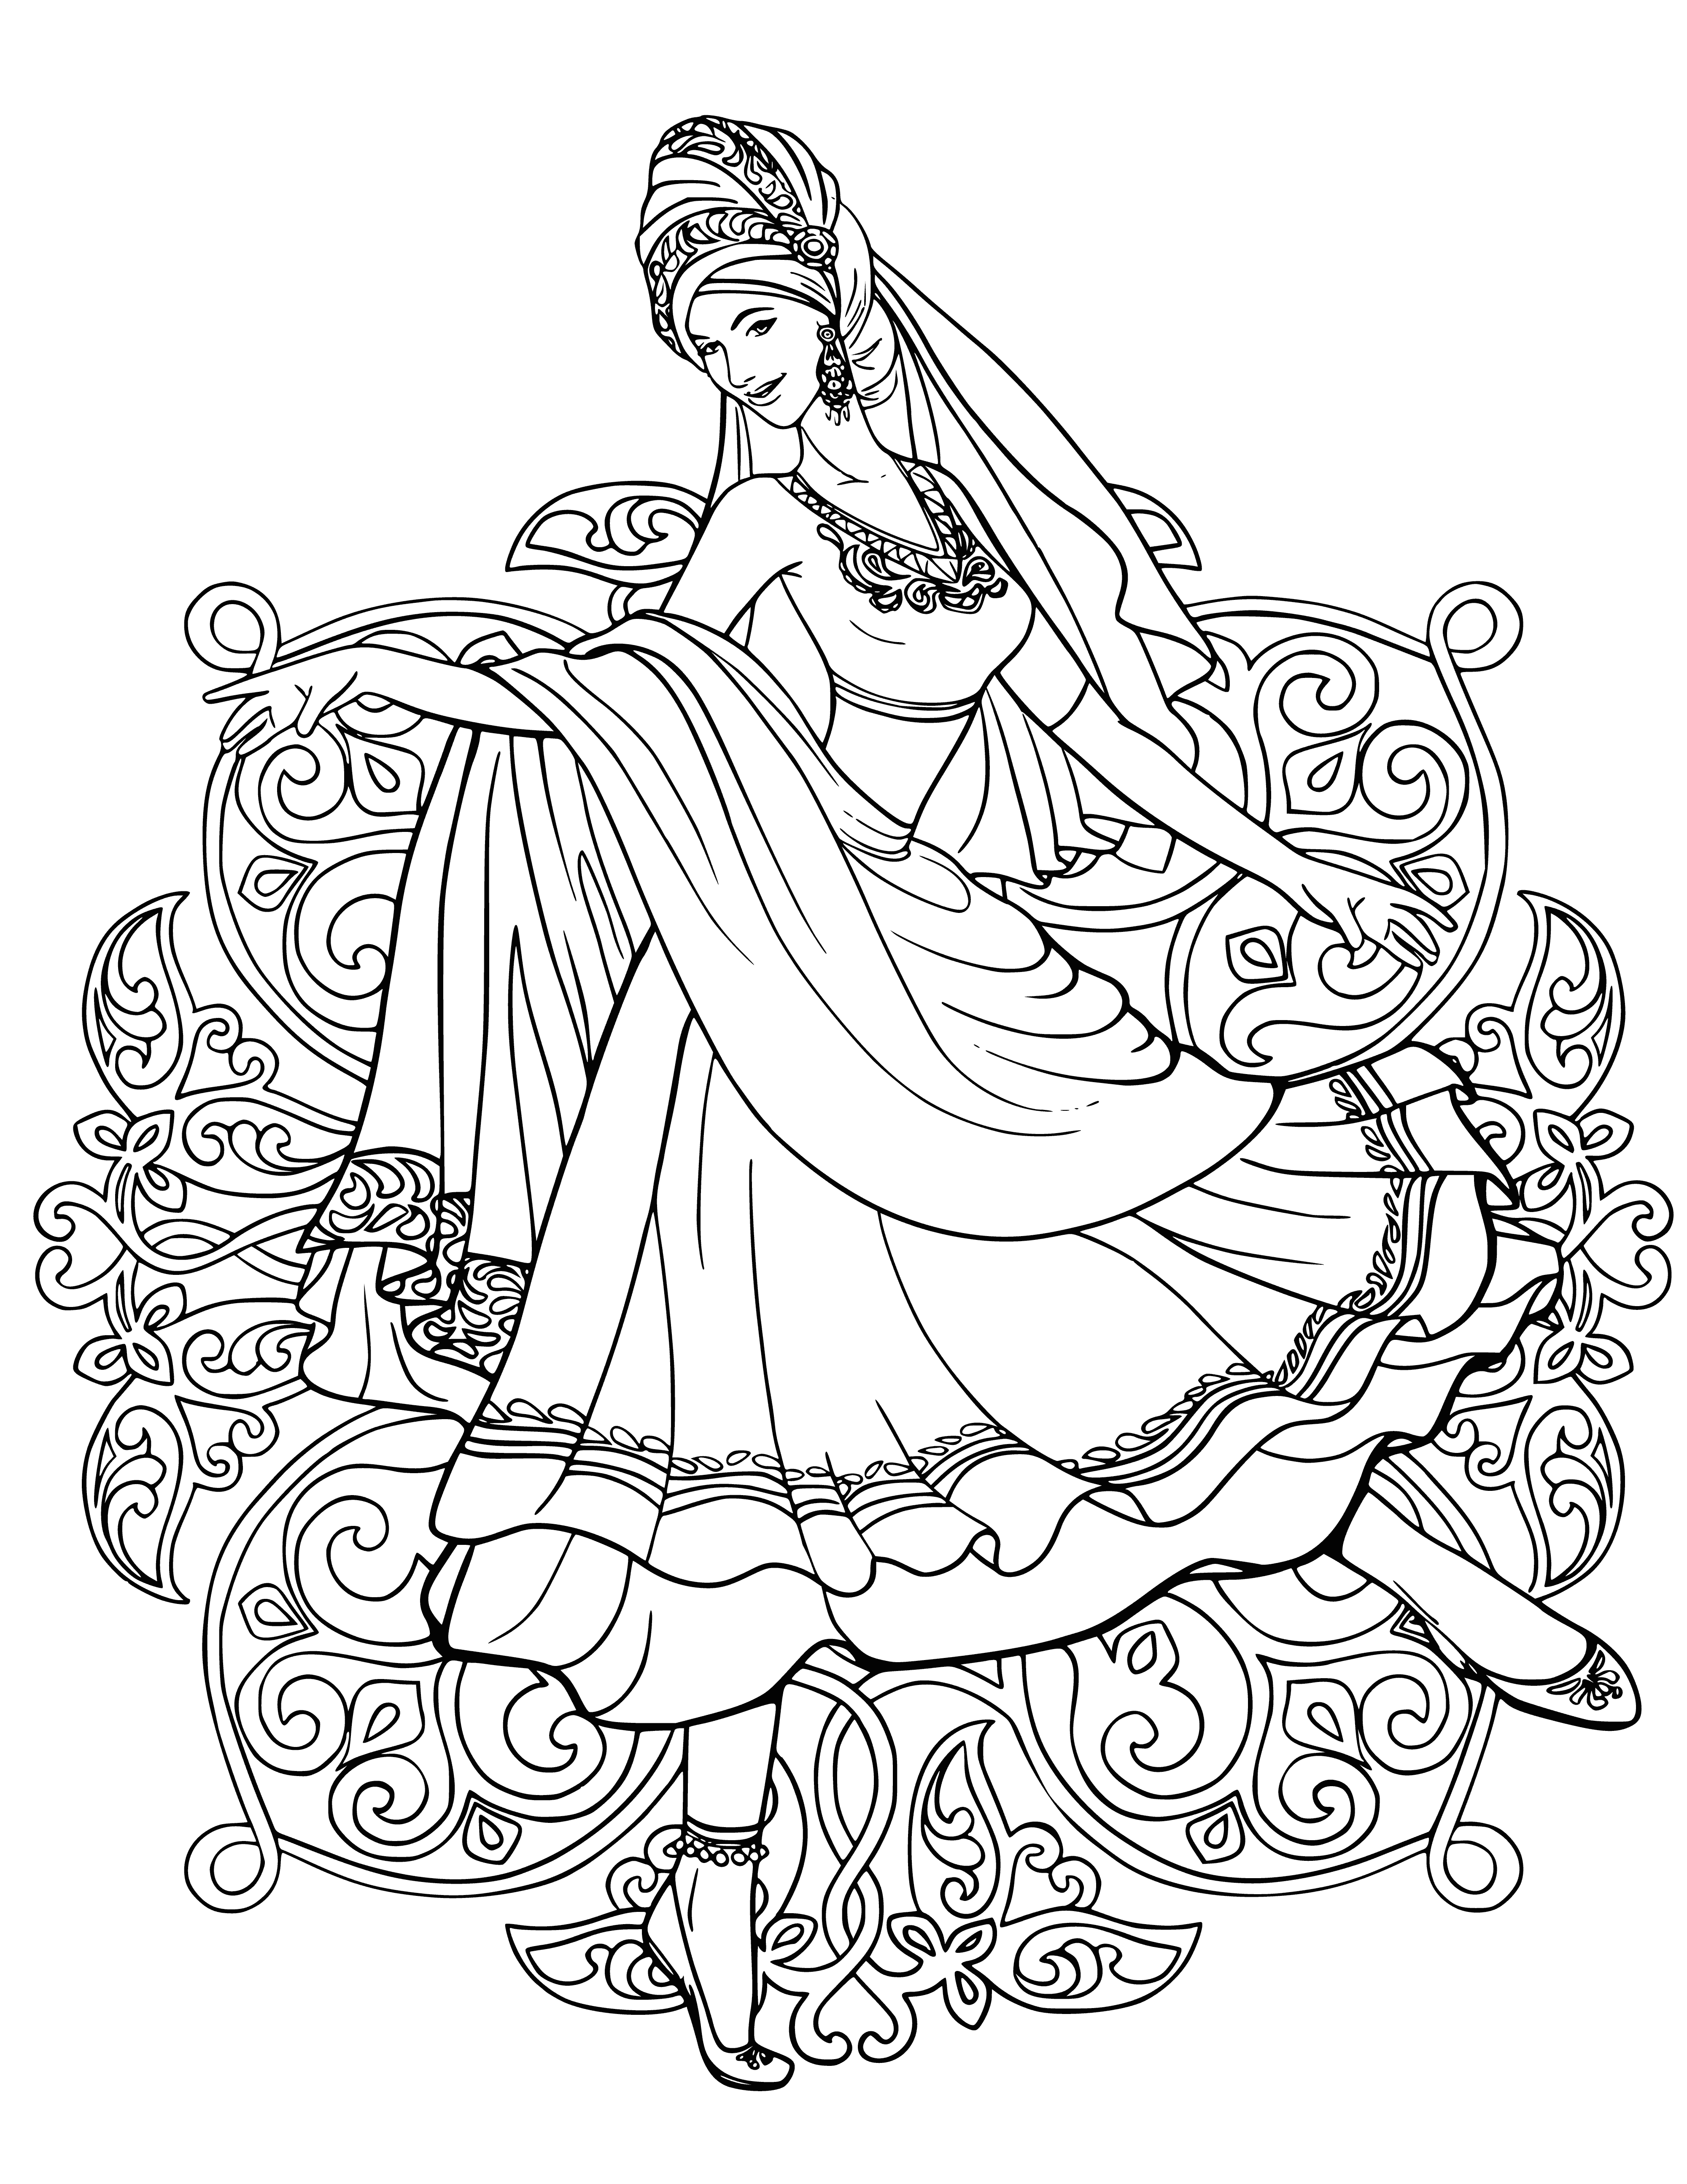 coloring page: Two girls dancing, eyes closed and smiling, looking happy and carefree.